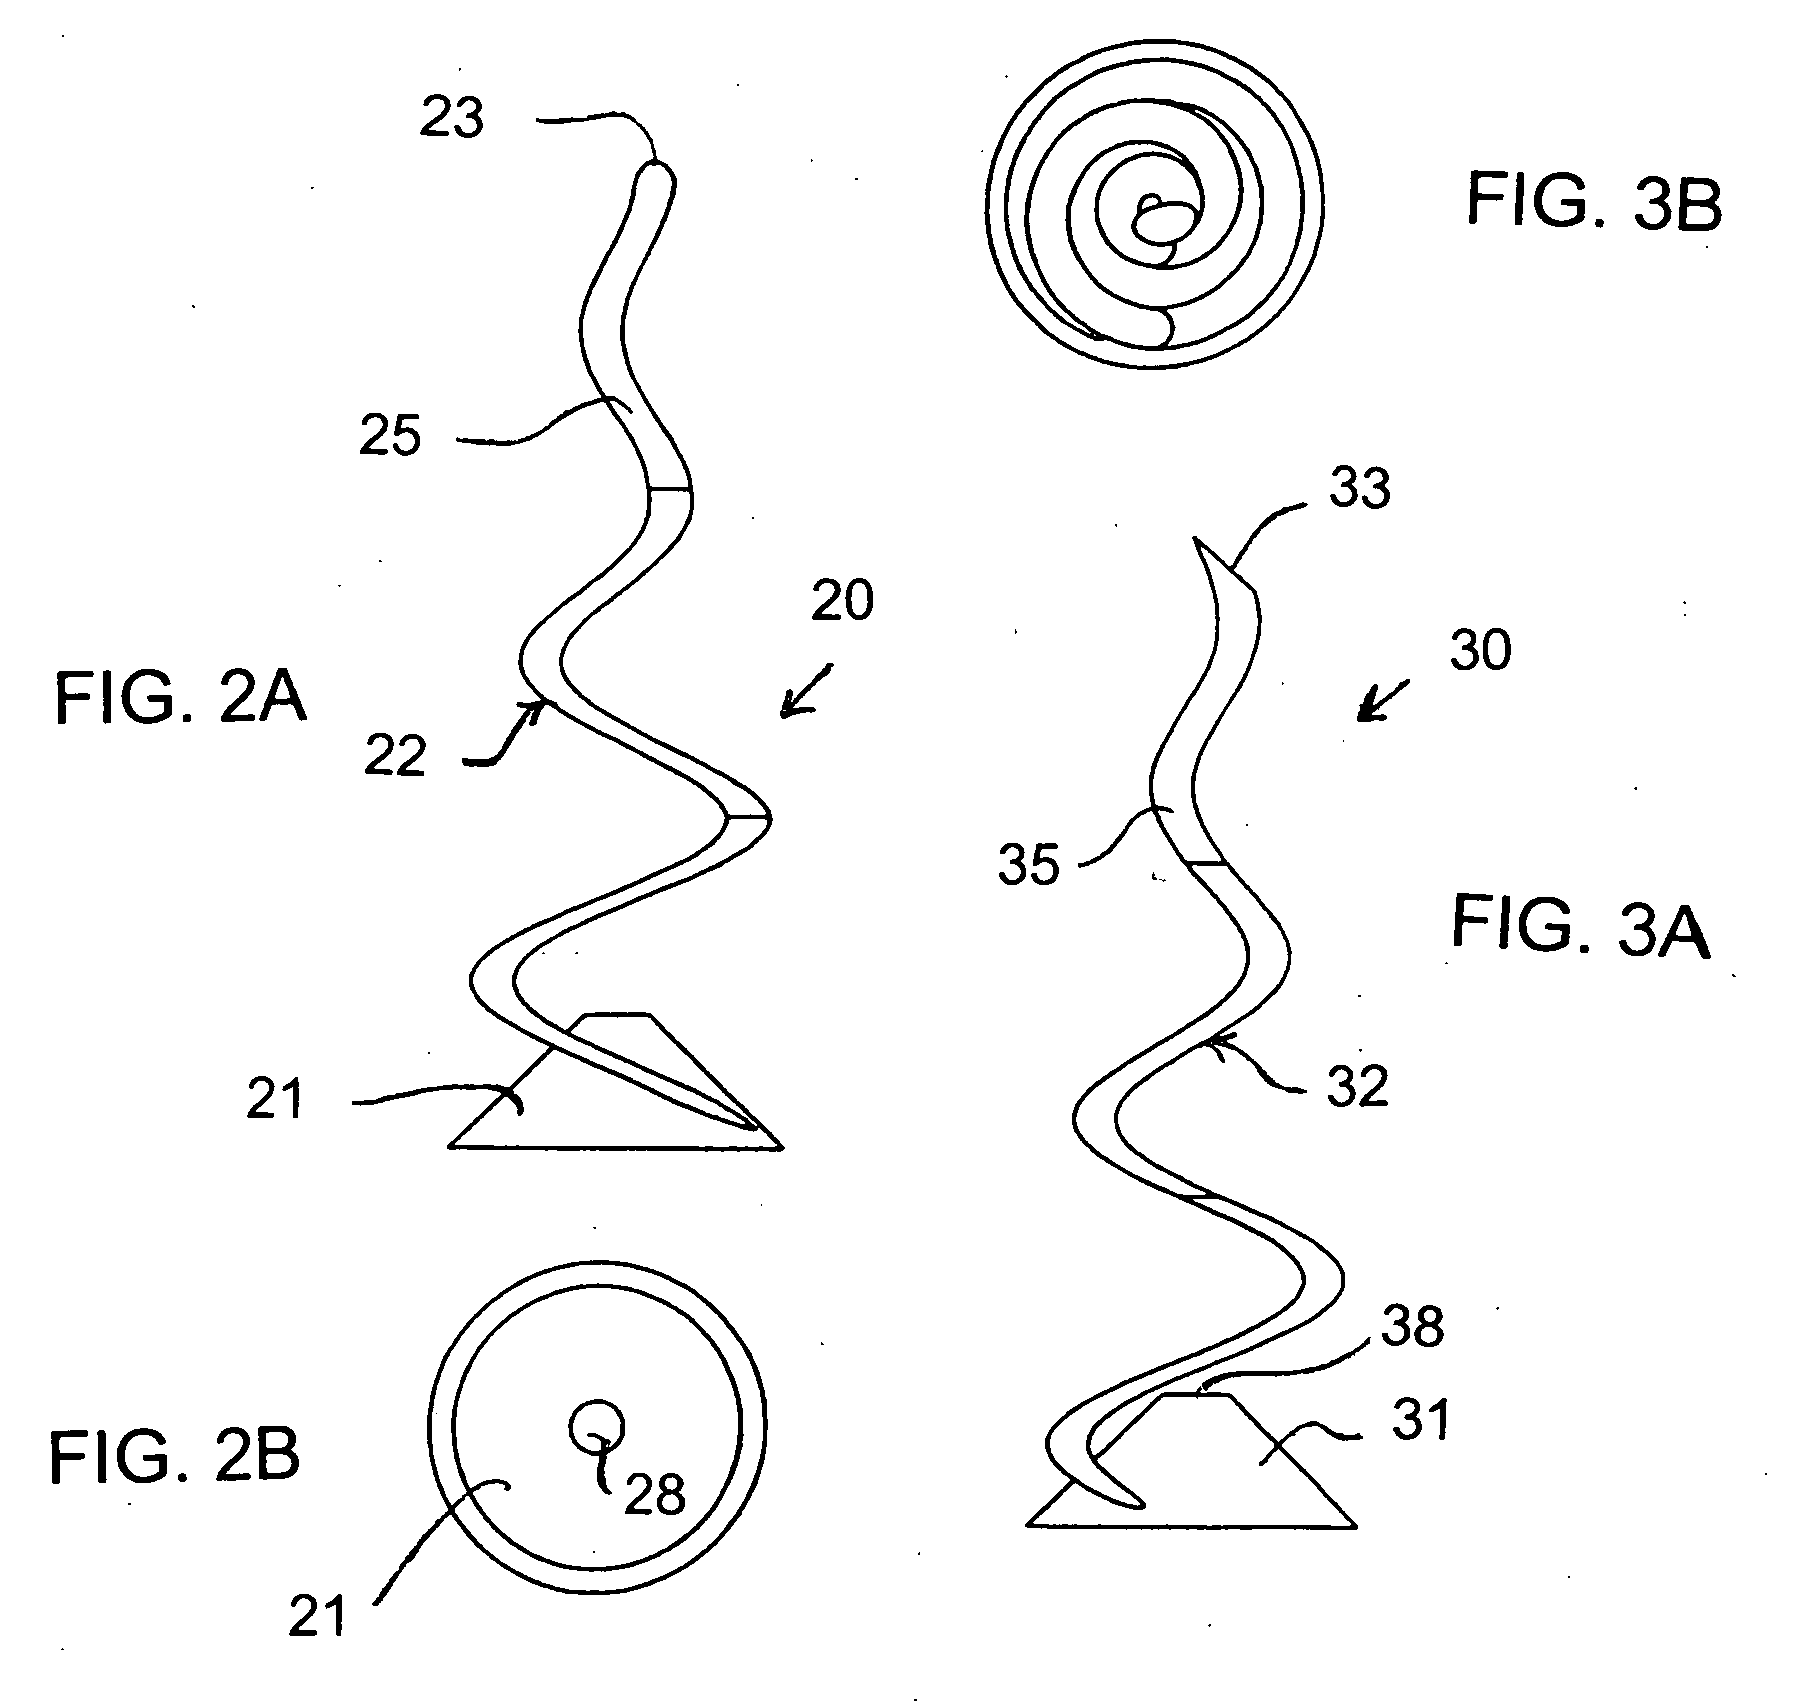 Fiber and process for producing three-dimensional, self interlacing composites by mechanical polymerization with ultrasonic manipulation